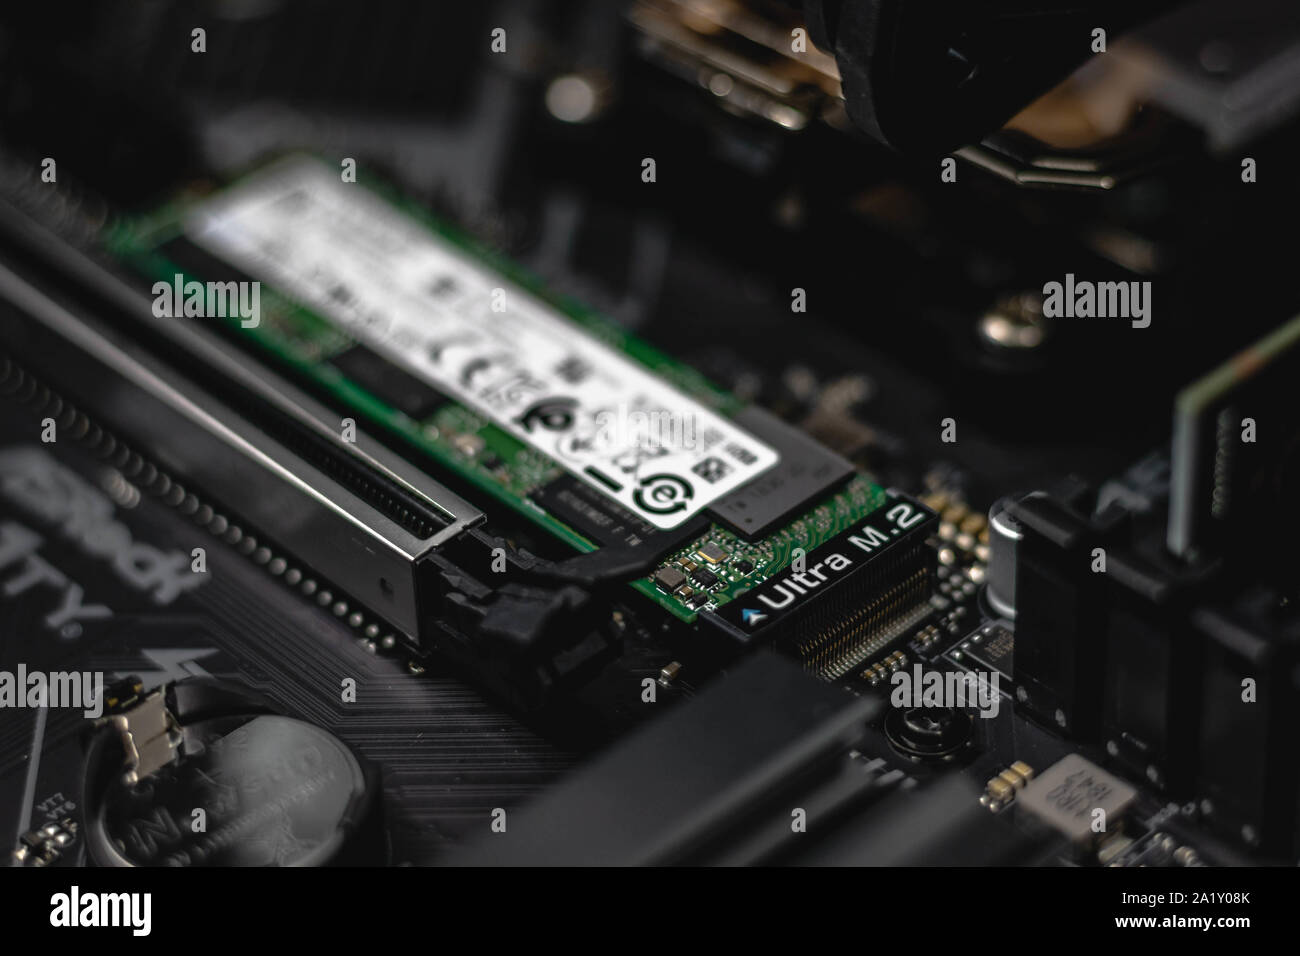 Ultra M.2 NVMe SSD Flash Drive mounted on a Mainboard/Motherboard Stock Photo